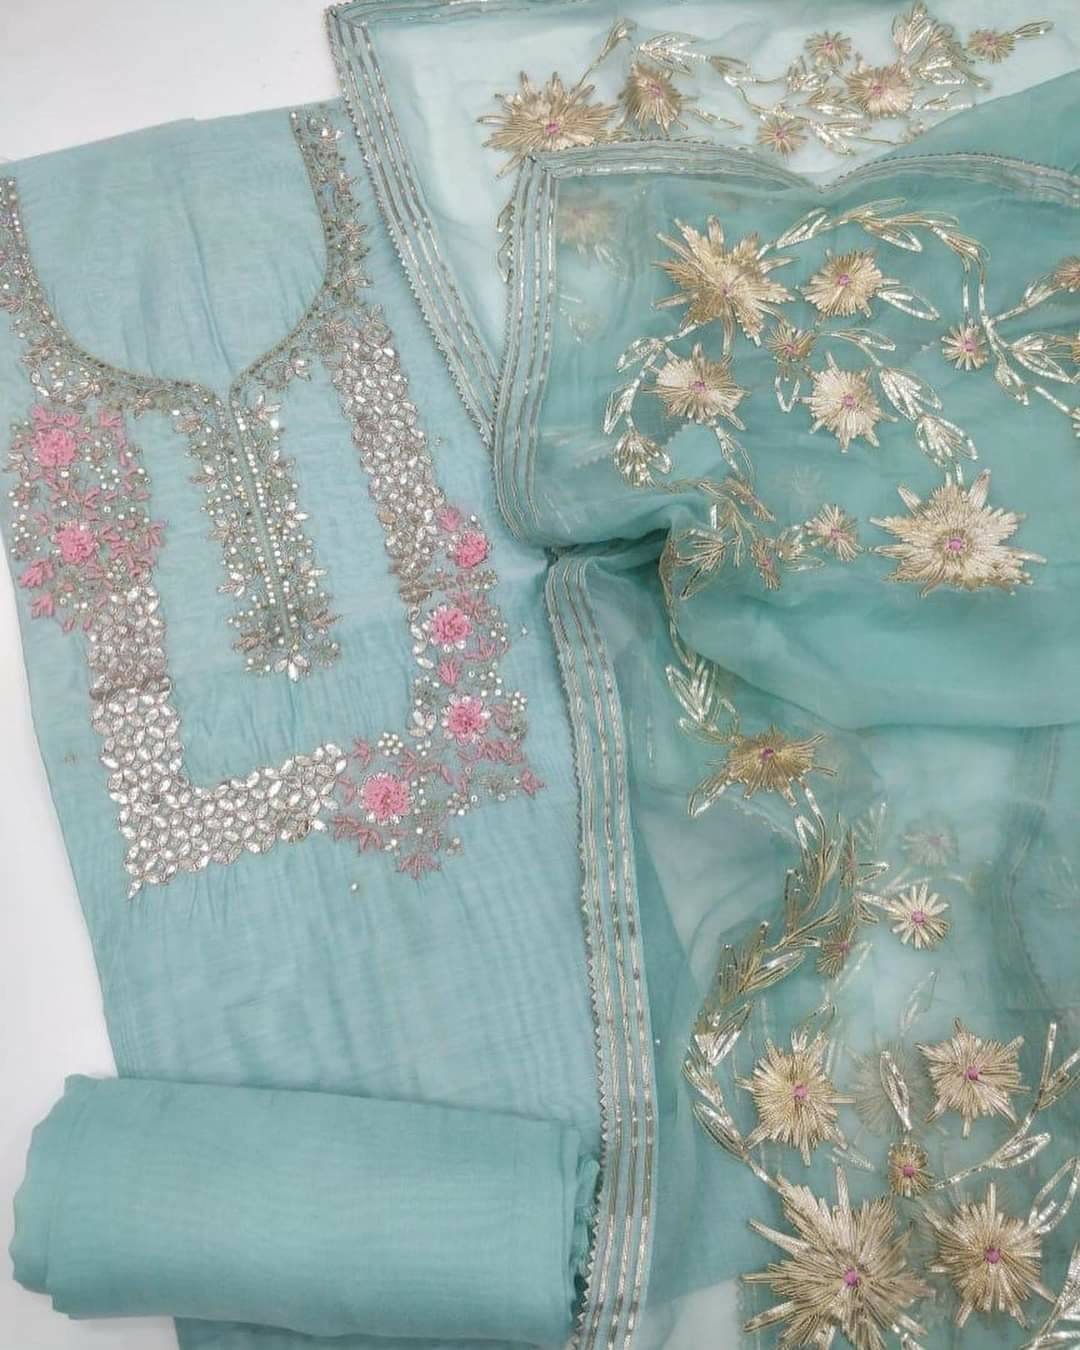 ATHARVA Hand Embroidery Salwar Kameez/embroidery - Etsy